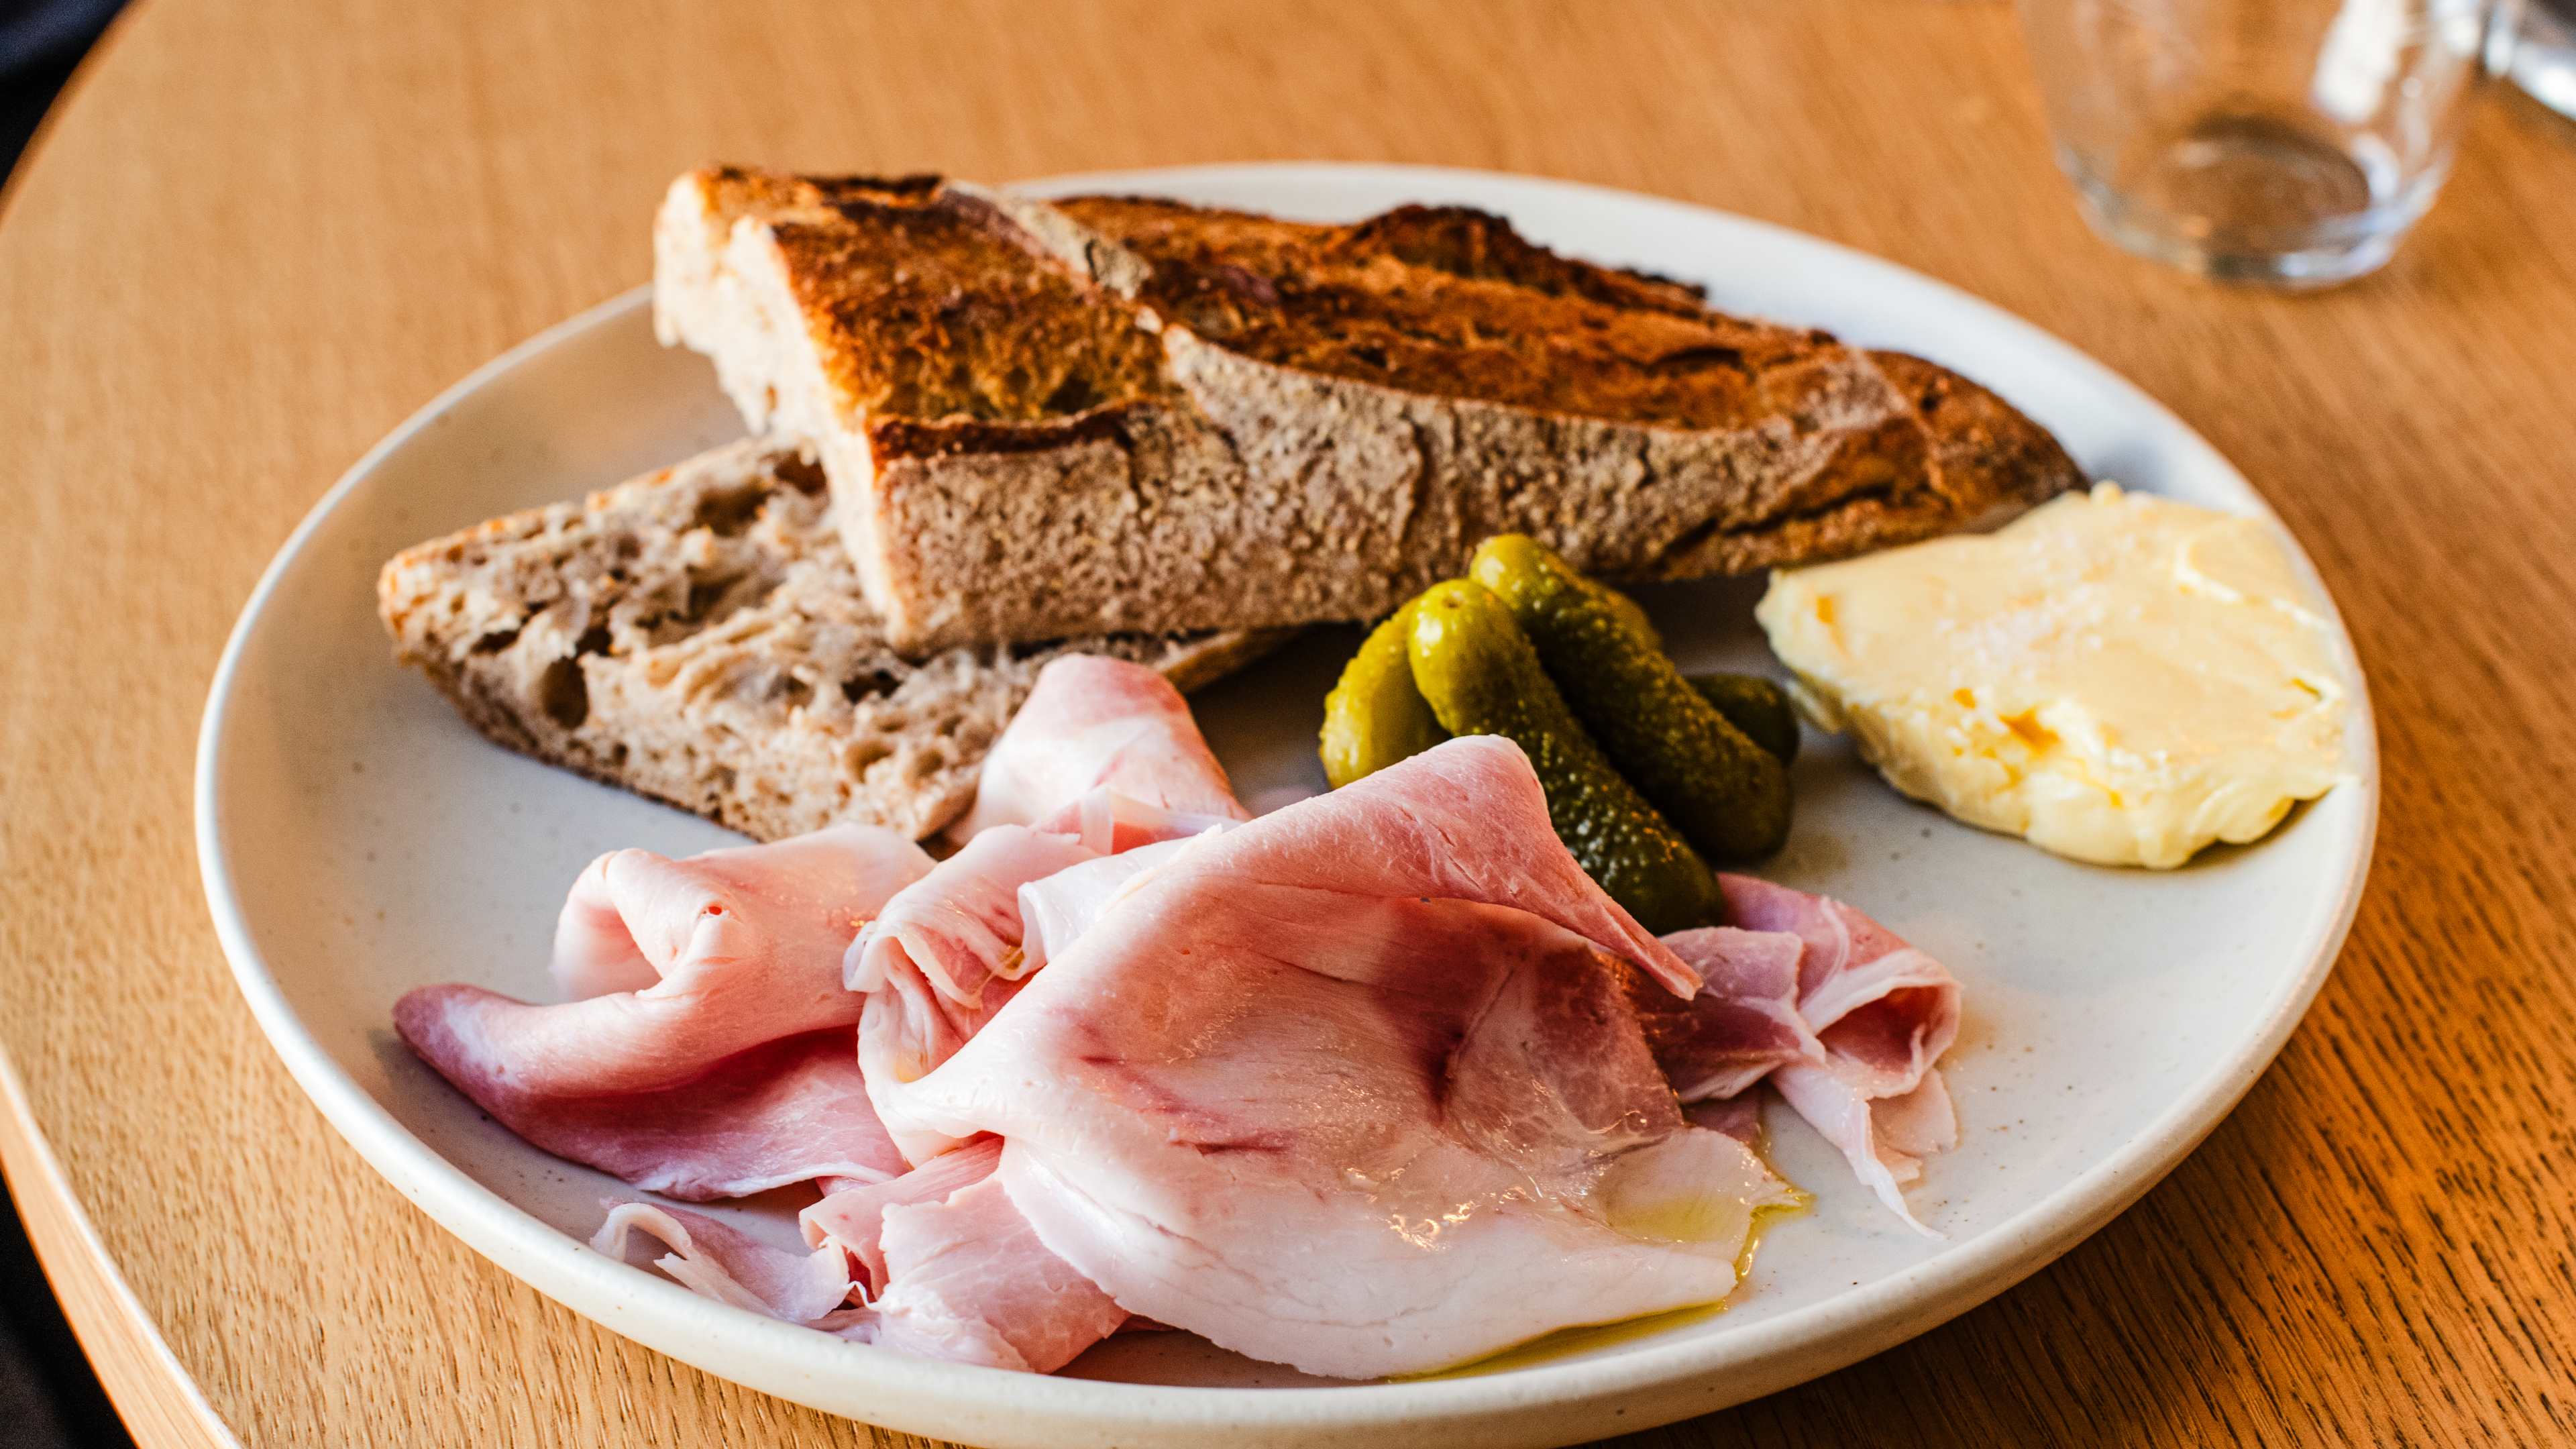 A plate of baguette, ham, pickles, and butter.